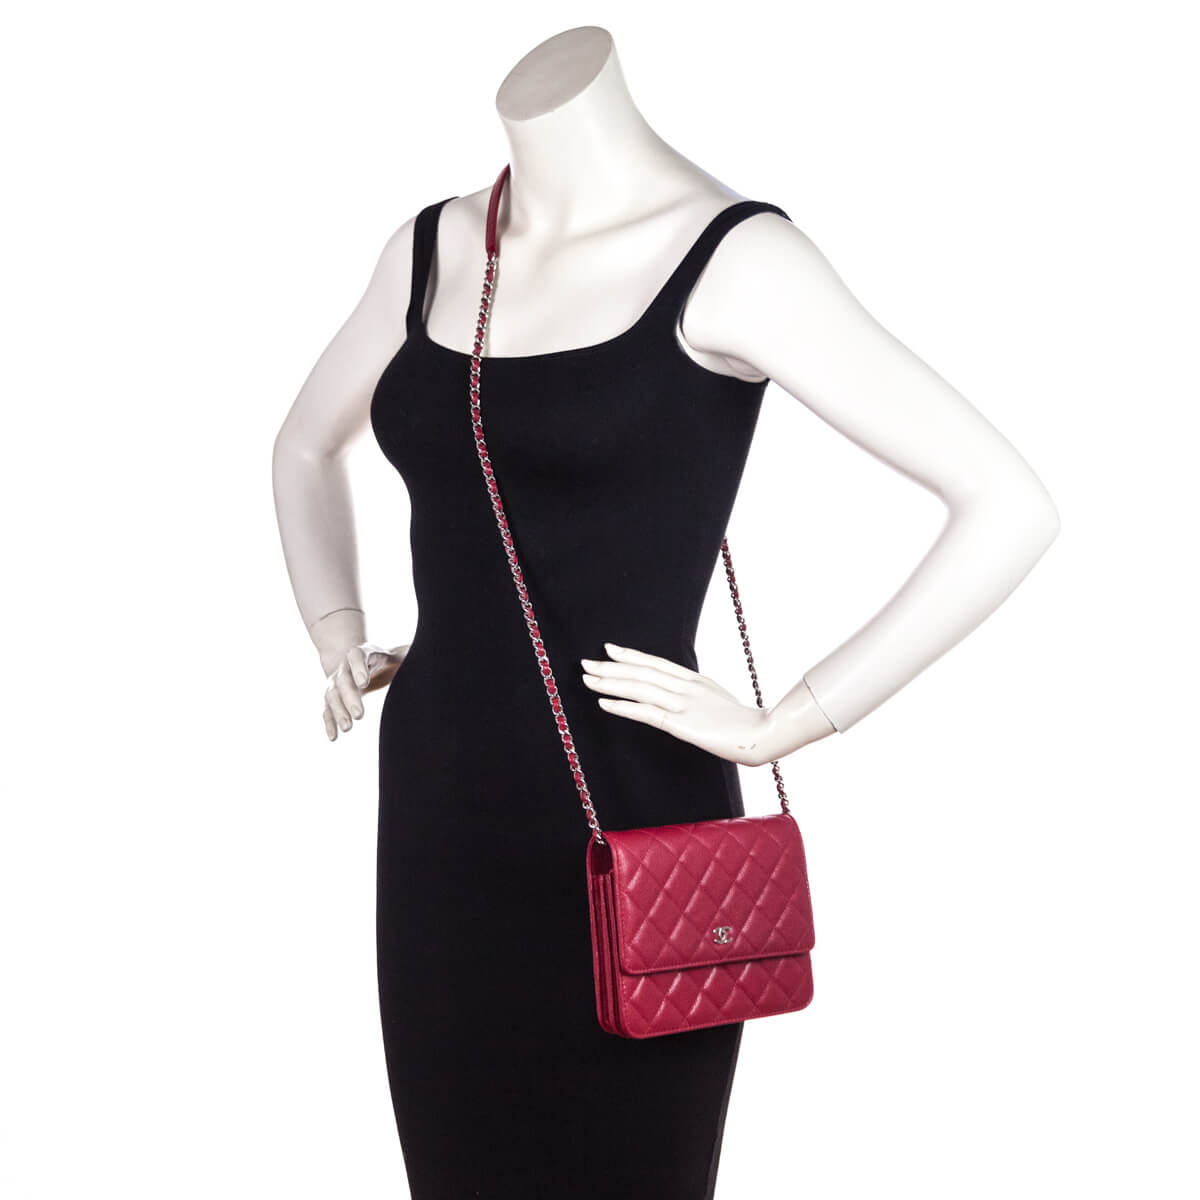 Chanel Red Quilted Caviar Clutch With Chain - Love that Bag etc - Preowned Authentic Designer Handbags & Preloved Fashions